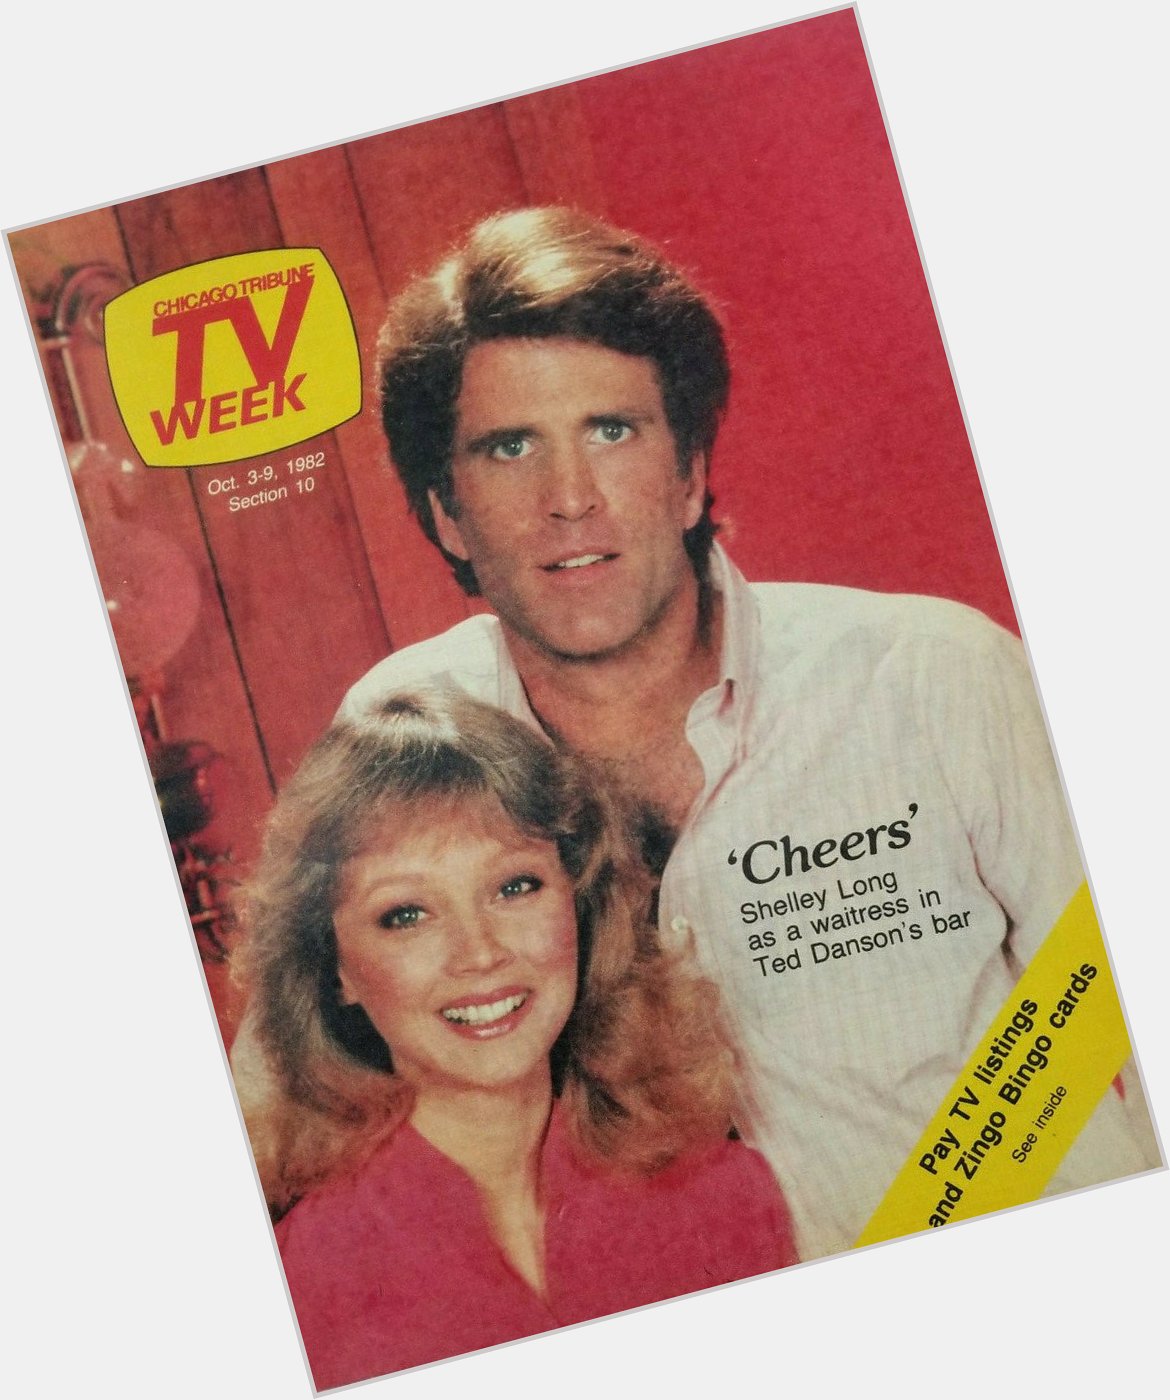 Happy Birthday to Ted Danson, who turns 73 today.
Chicago Tribune TV Week.  October 3 - 9, 1982 